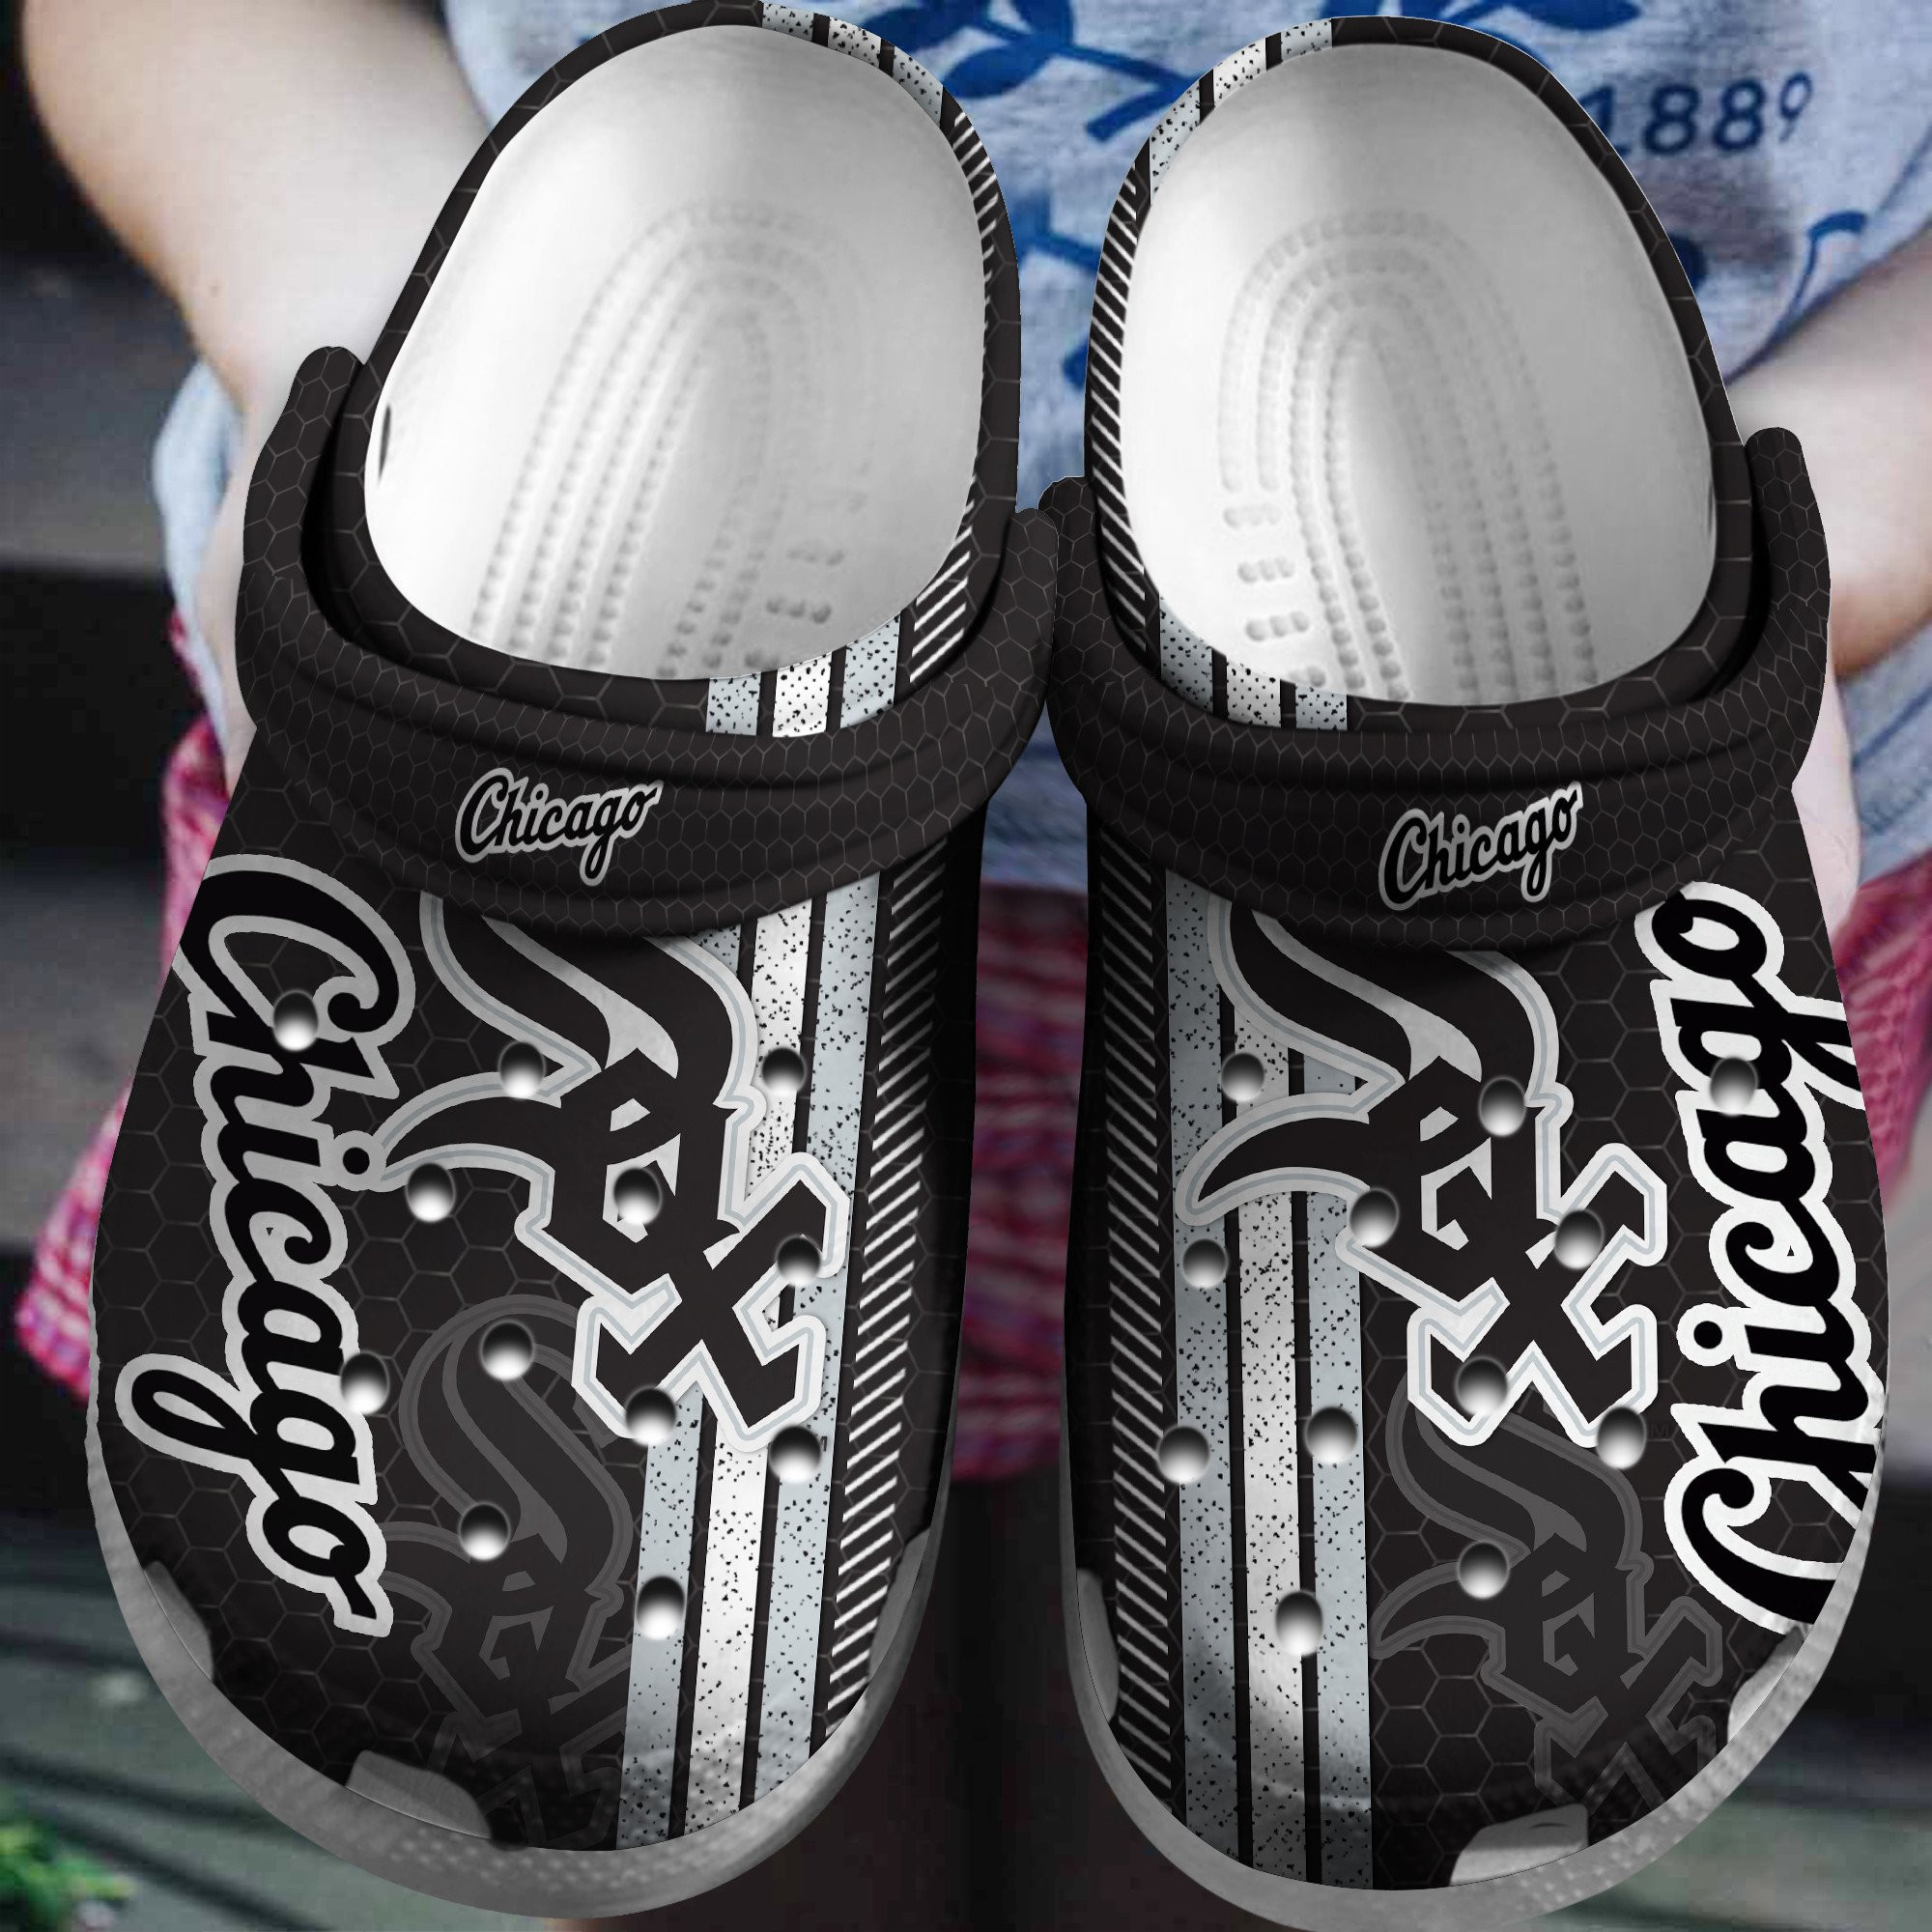 Hot Mlb Team Chicago White Sox Black-White Crocs Clog Shoesshoes Trusted Shopping Online In The World